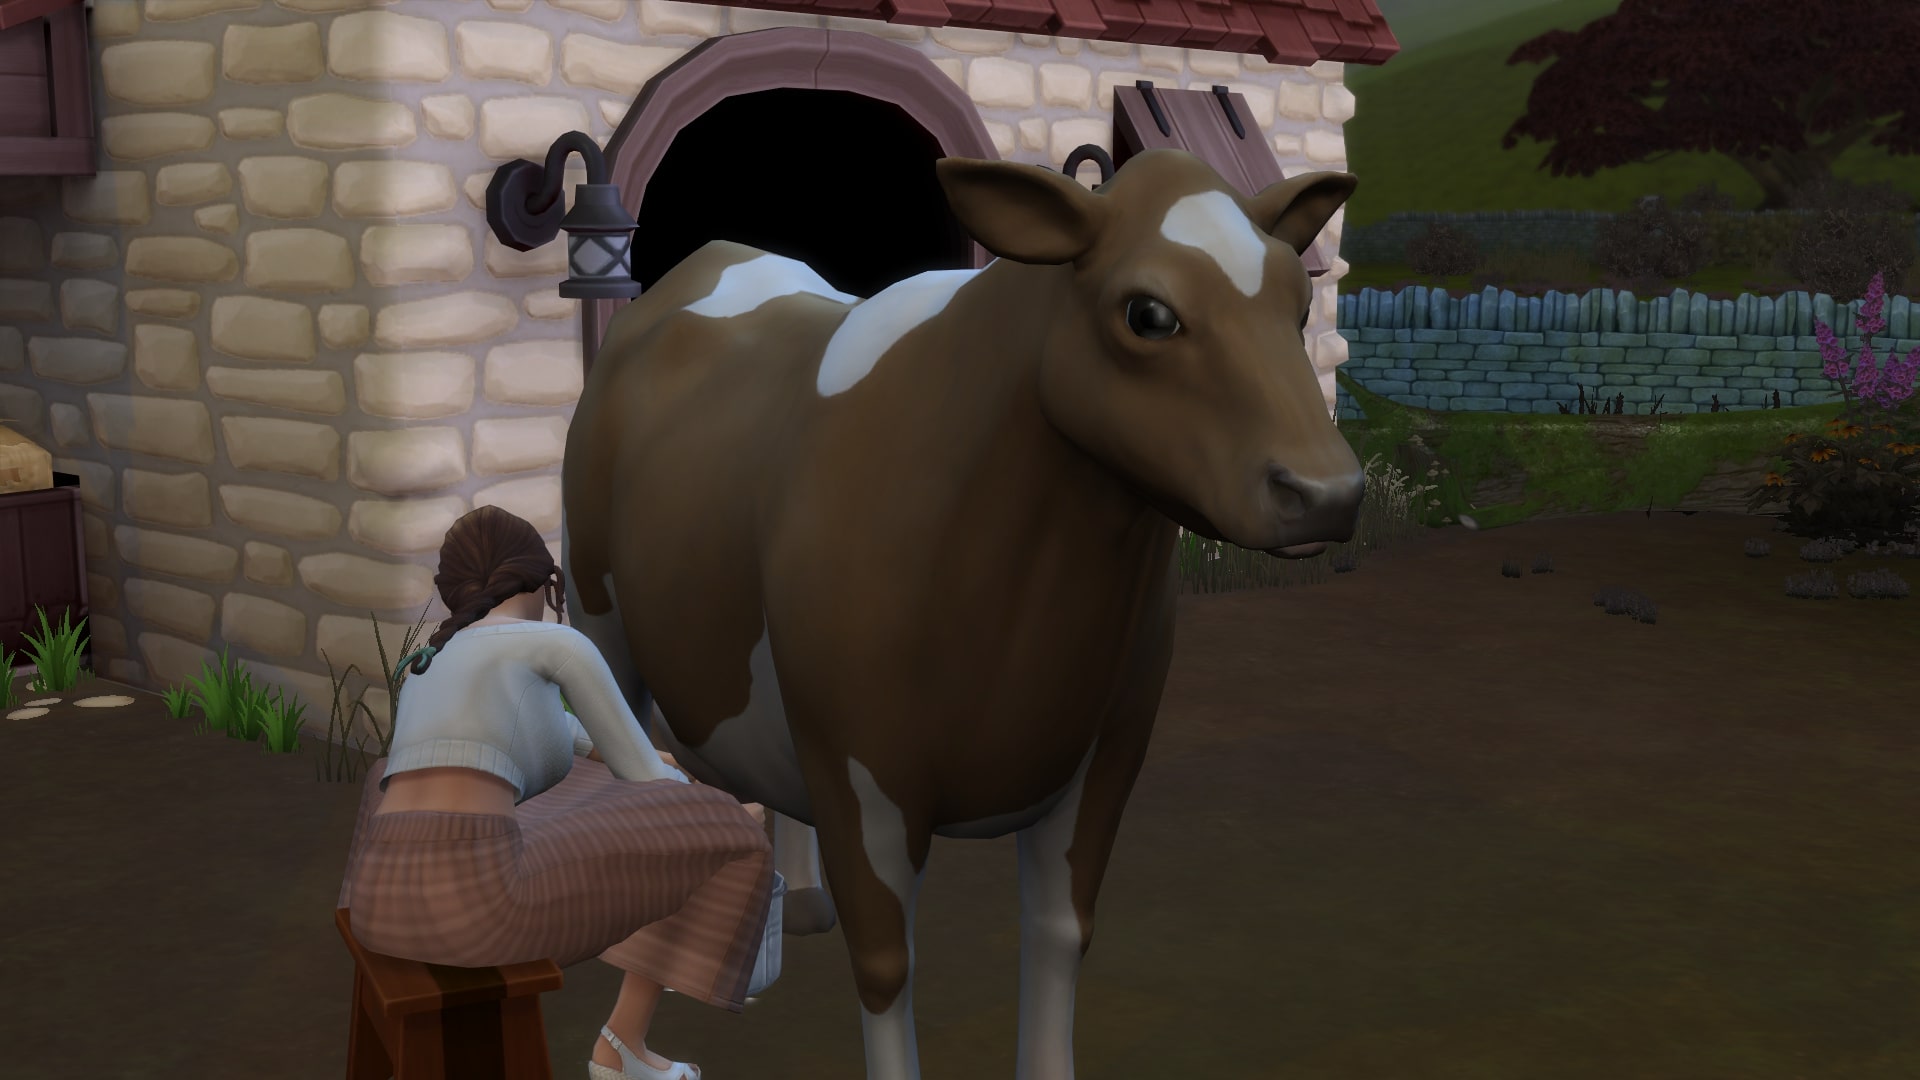 The Sims 4: Rural Idyll - Milking a Cow